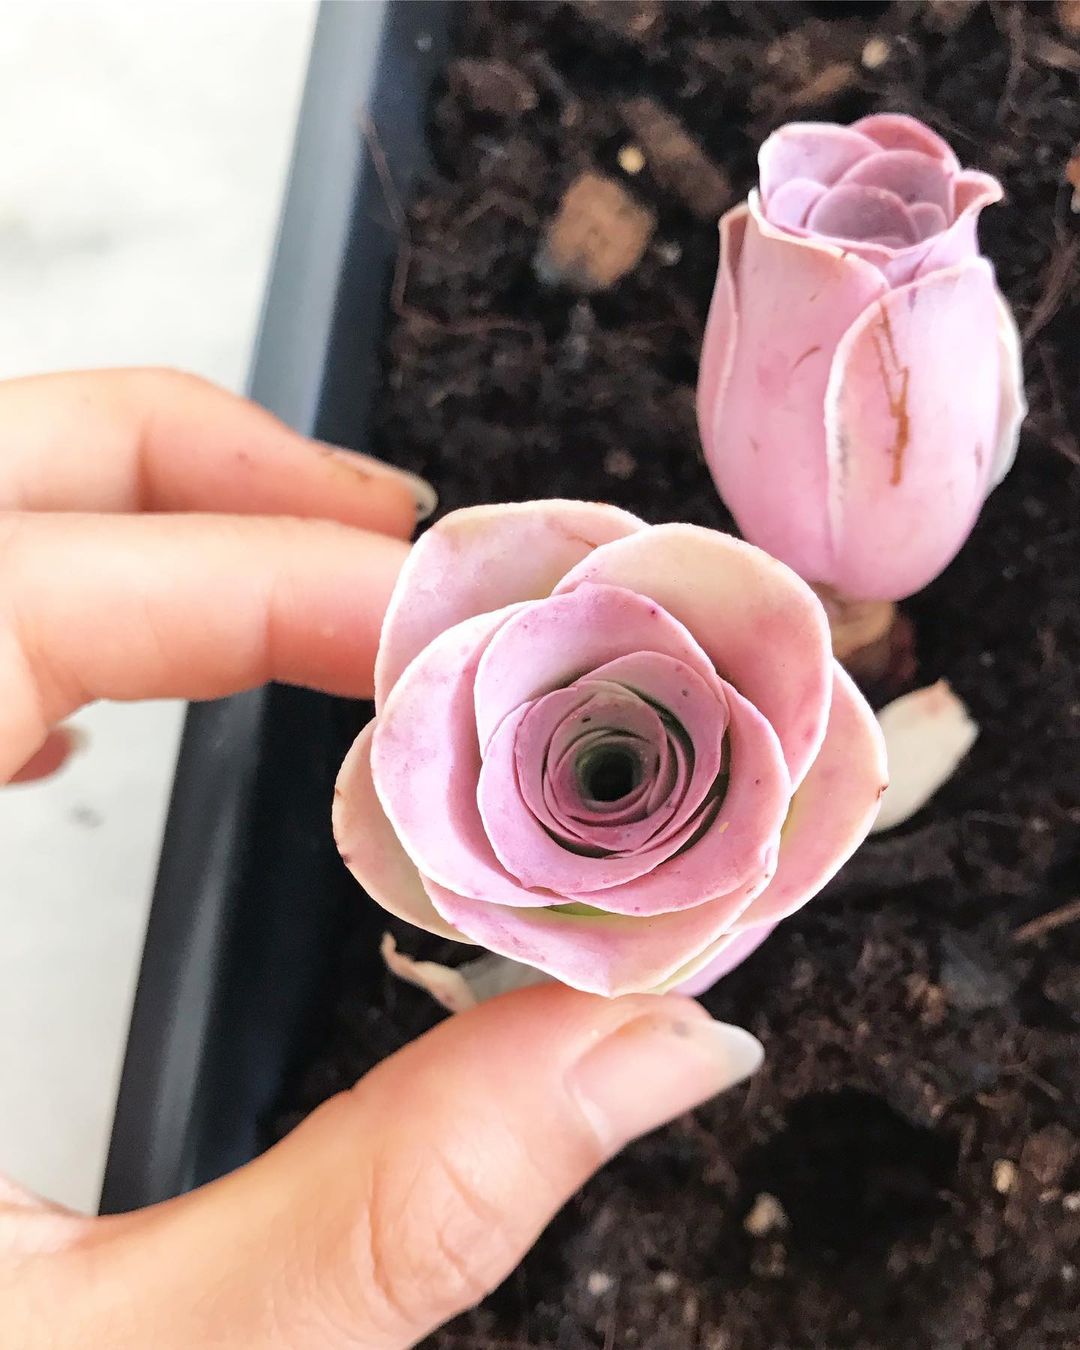 Succulents looking like pink roses - on Thursd